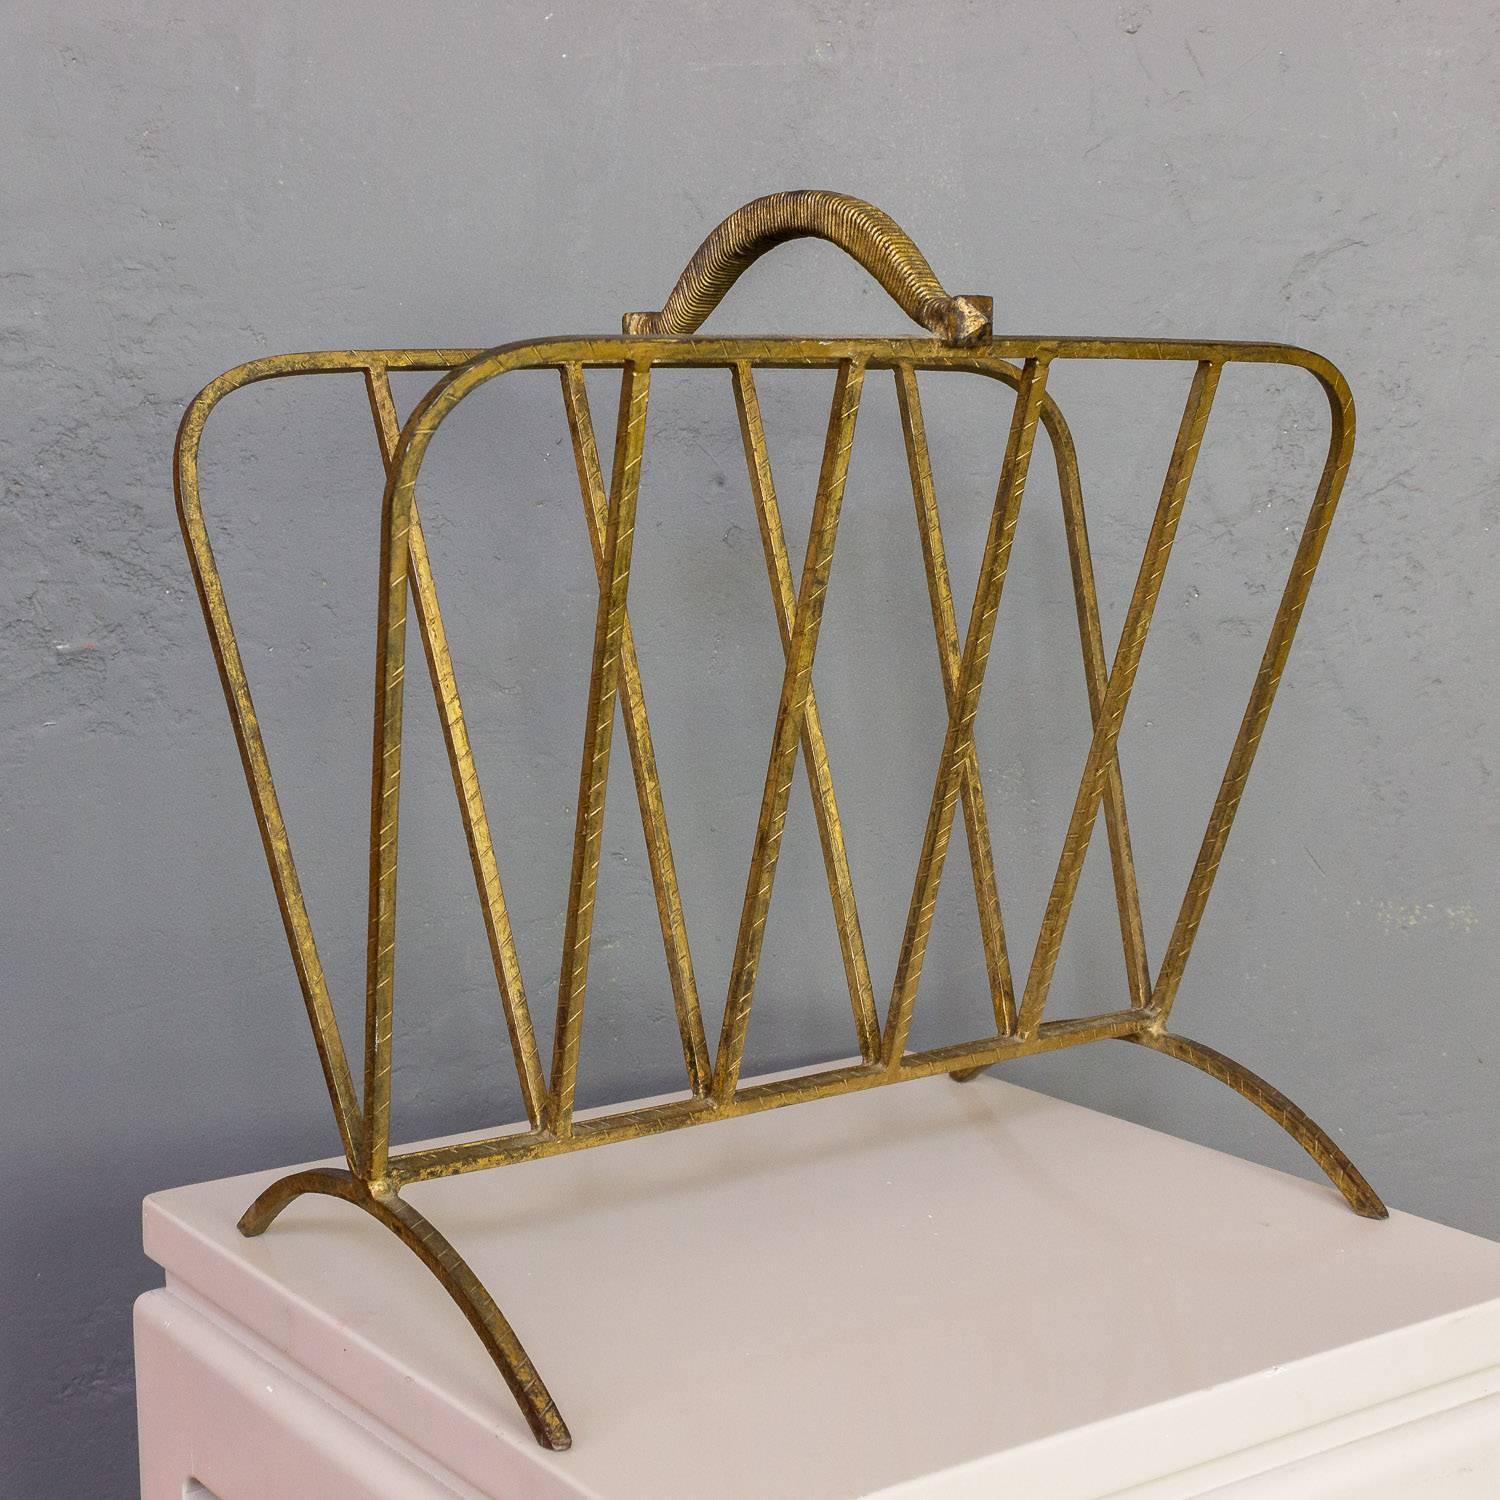 This unique Spanish 1940s gilt iron magazine rack features a hammered texture and a “woven” handle. With dimensions of 16 inches by 16 inches and 8 inches deep, it partners perfectly with a sofa or your favorite reading chair and compliments a